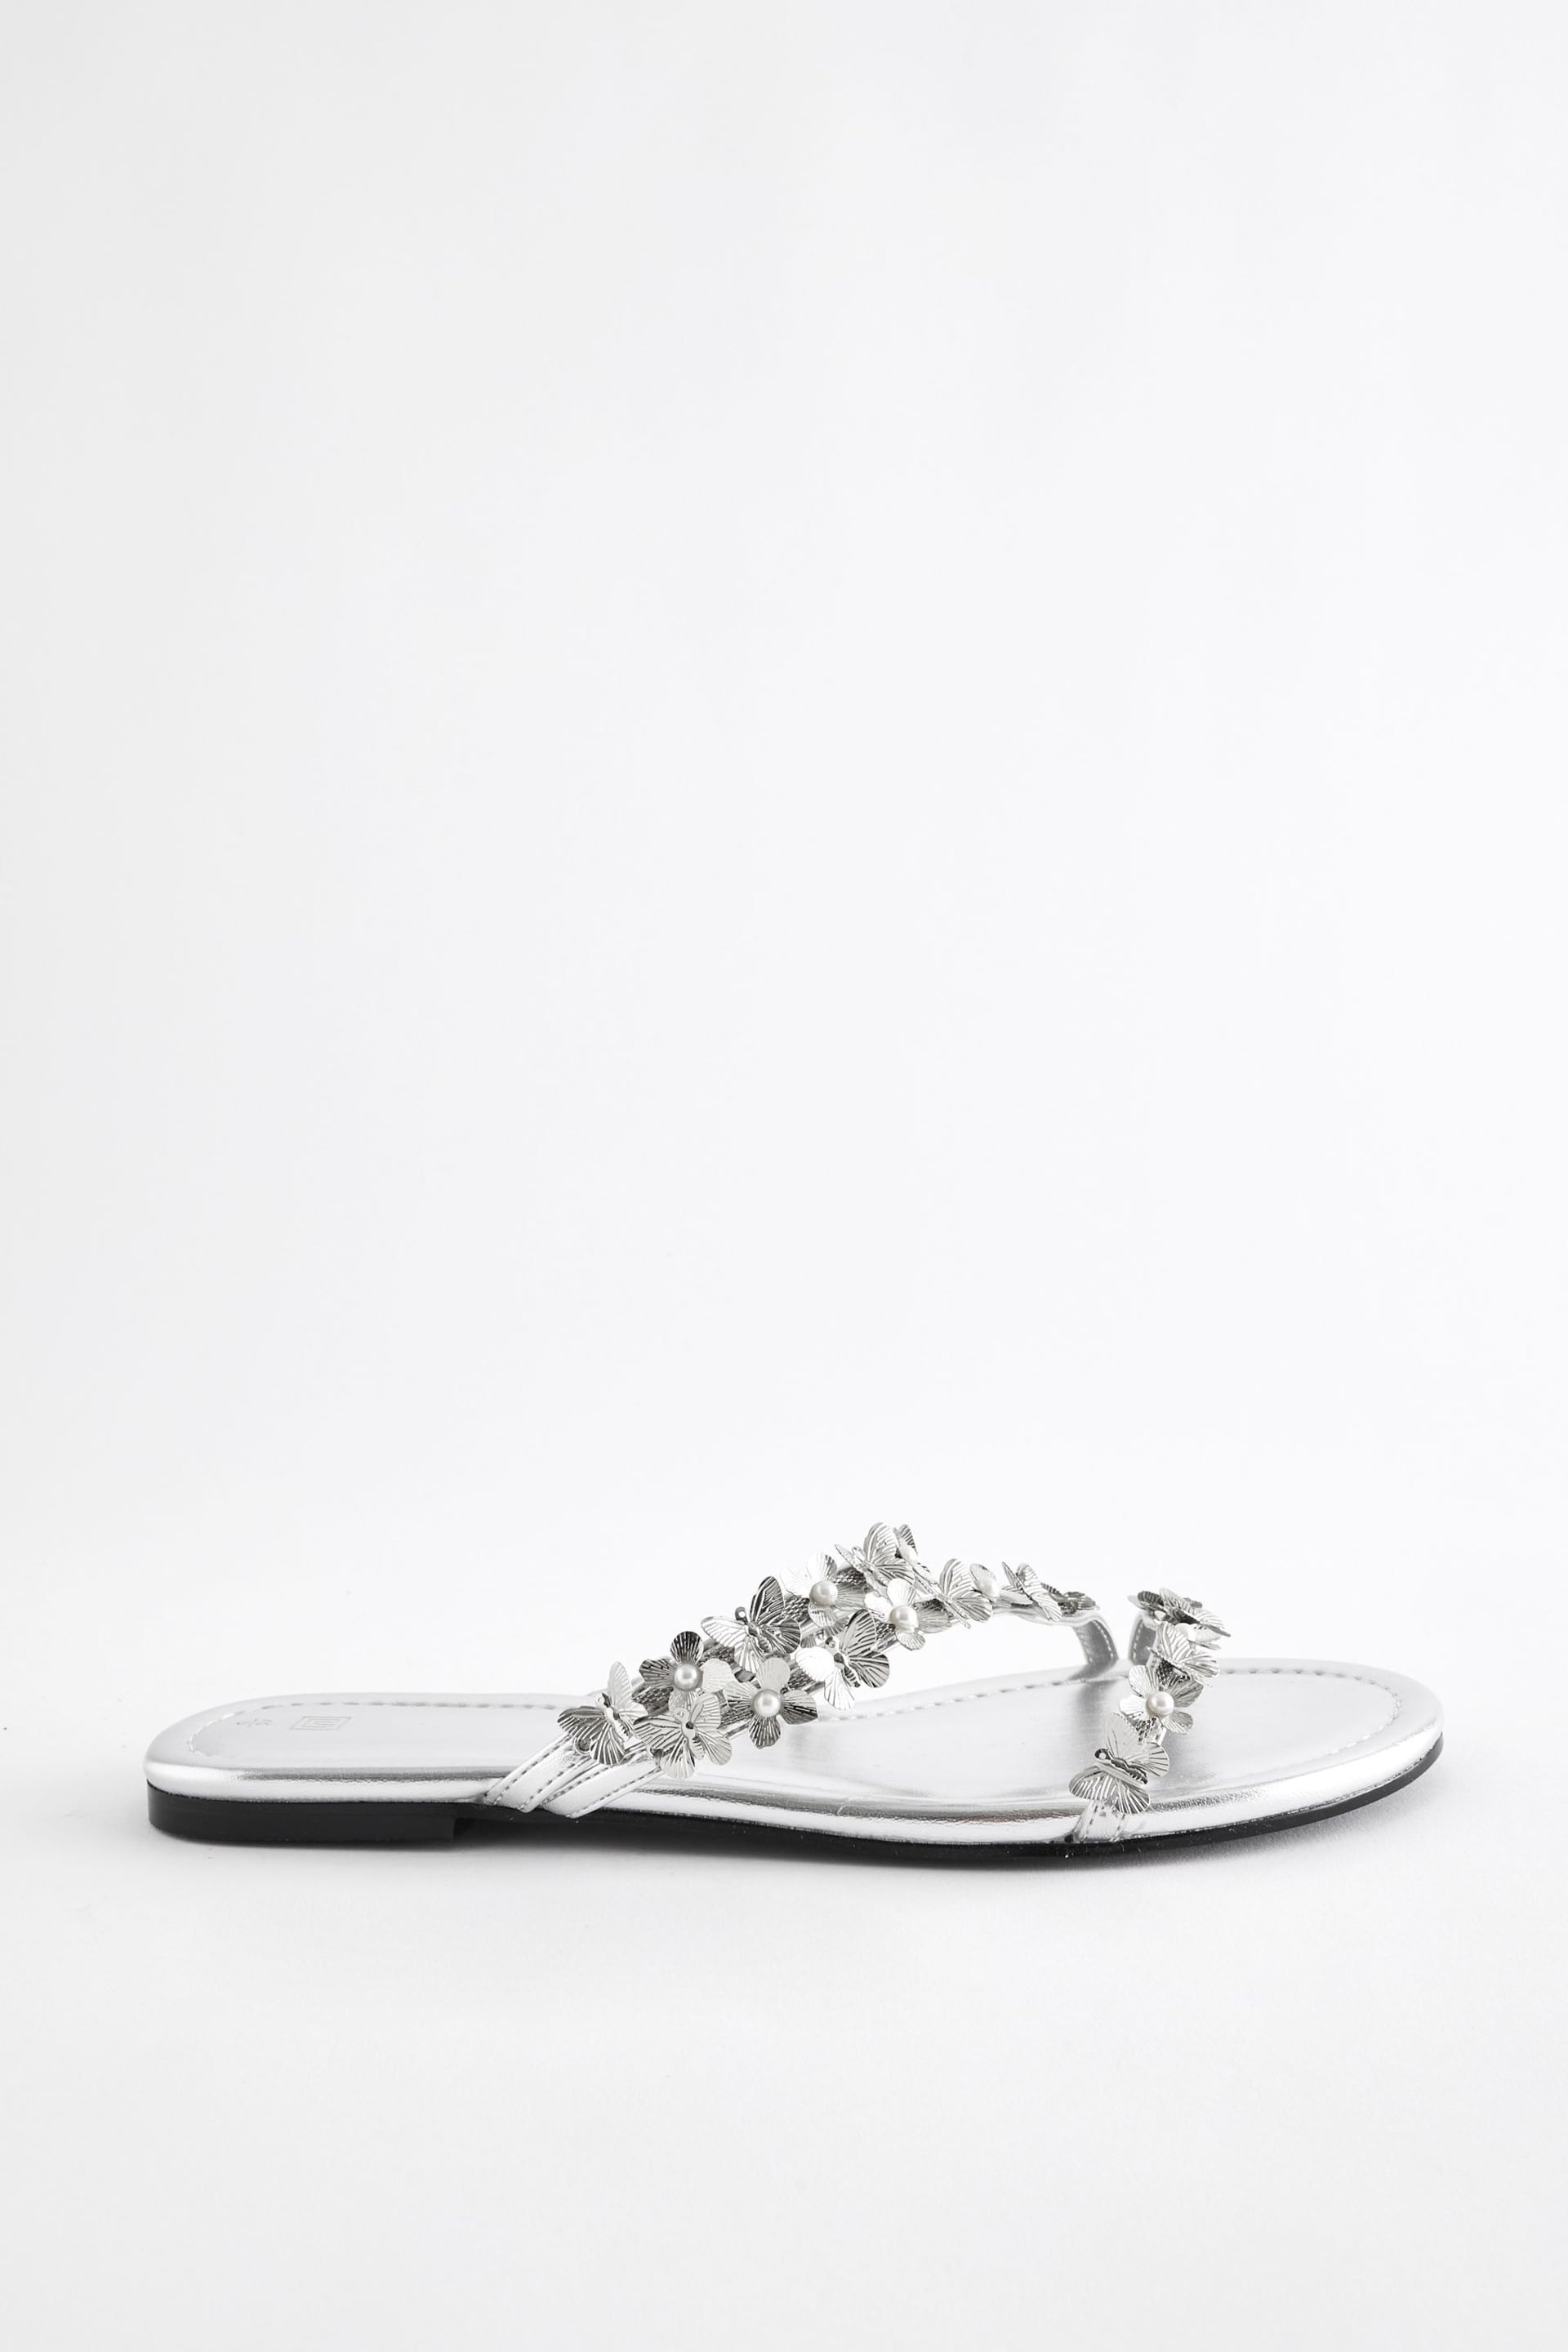 Silver Butterfly Strappy Mules - Image 4 of 7